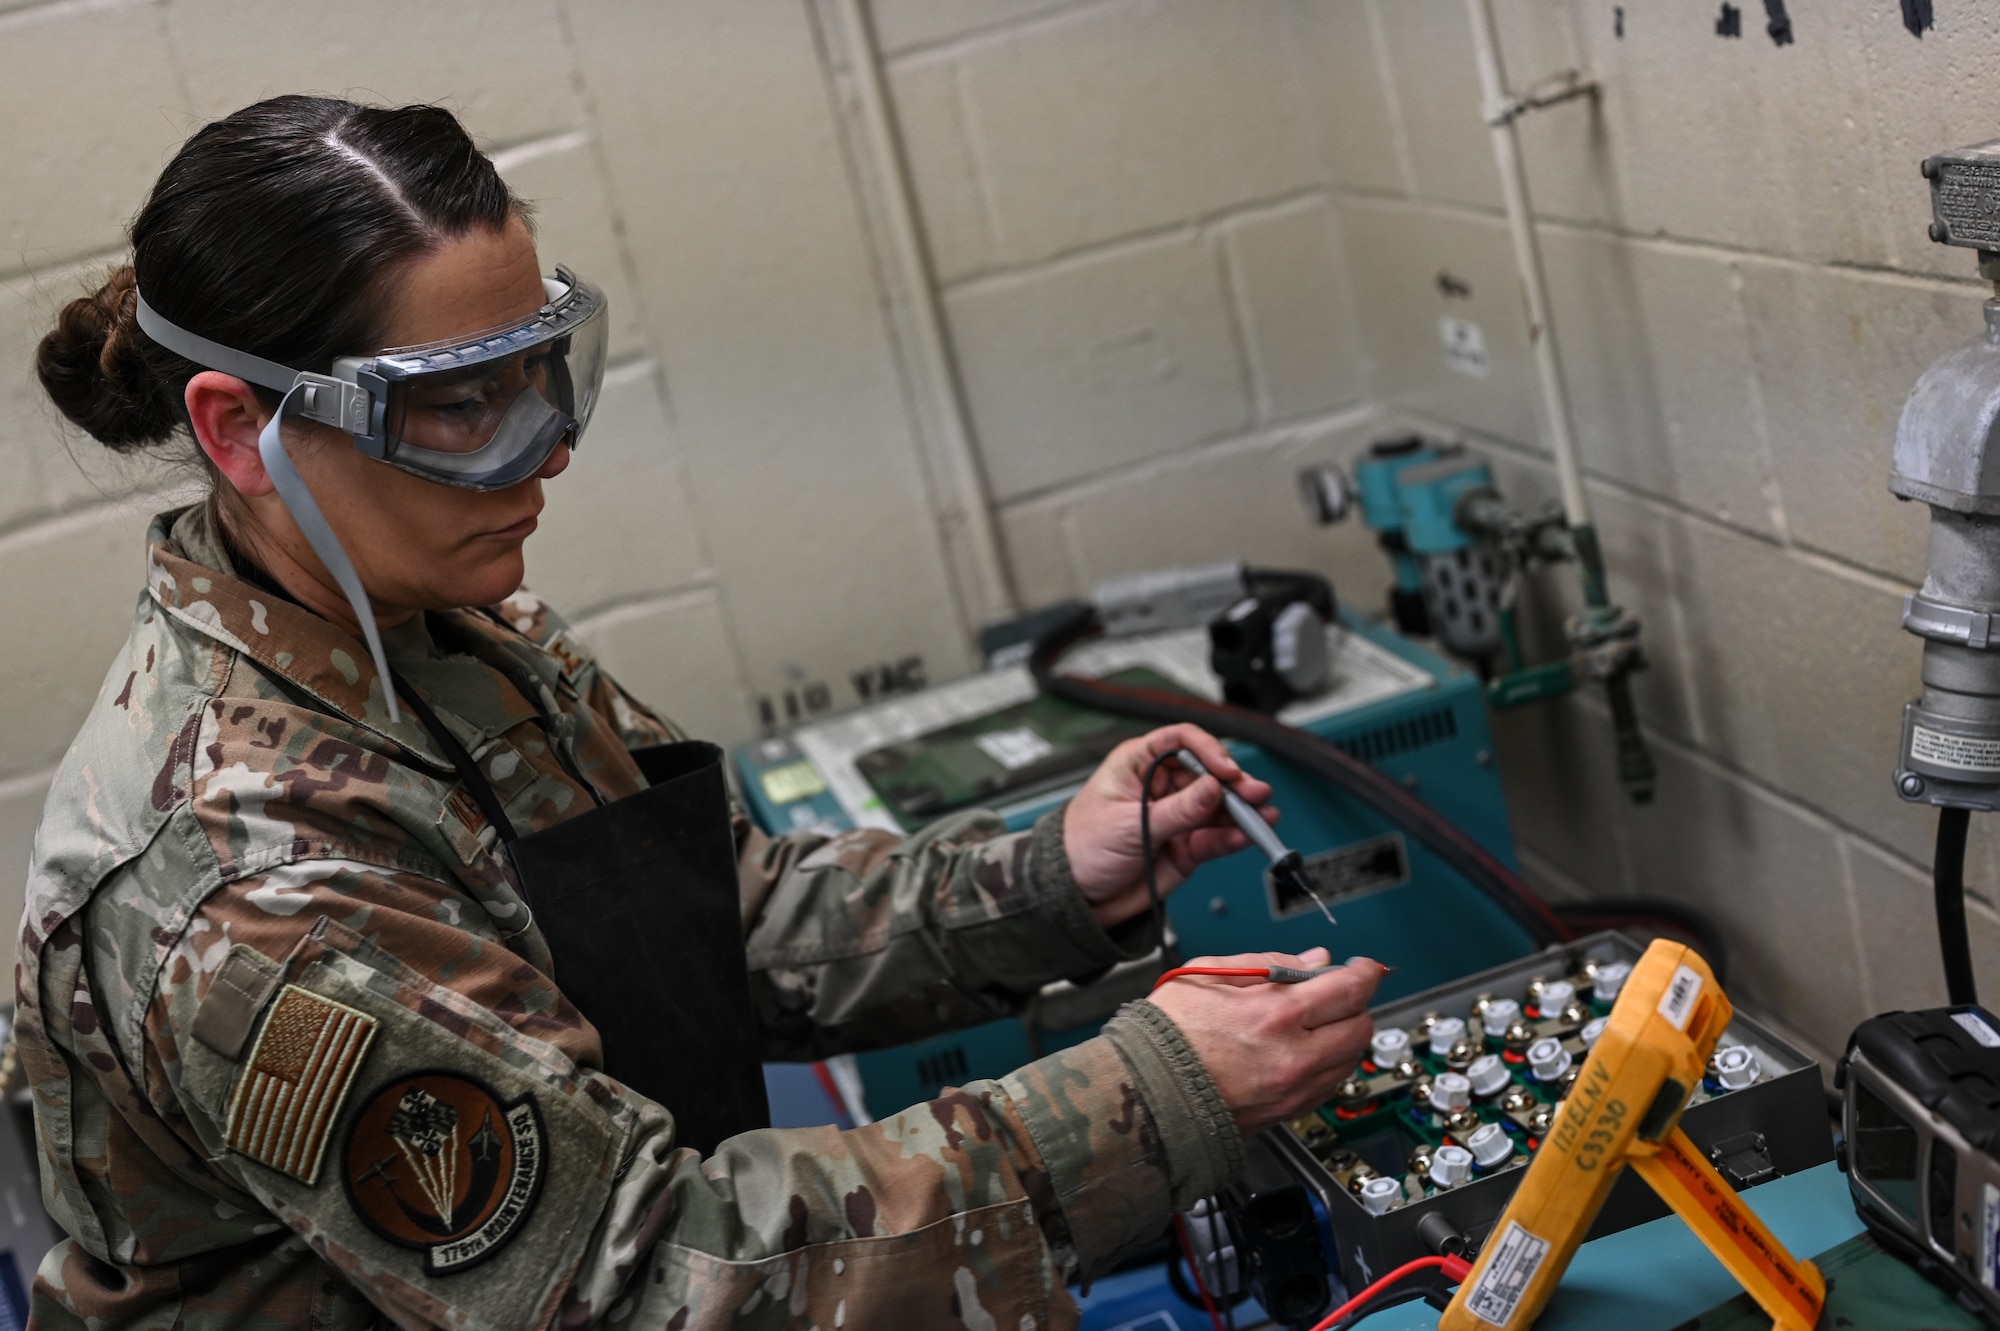 Senior Airman Jayme Bradley, an electrical and environmental specialist for the 175th Maintenance Squadron, Maryland National Guard, tests the batteries of an A-10C Thunderbolt II aircraft Dec. 18, 2020 at the Warfield Air National Guard Base at Martin State Airport, Middle River, Md.